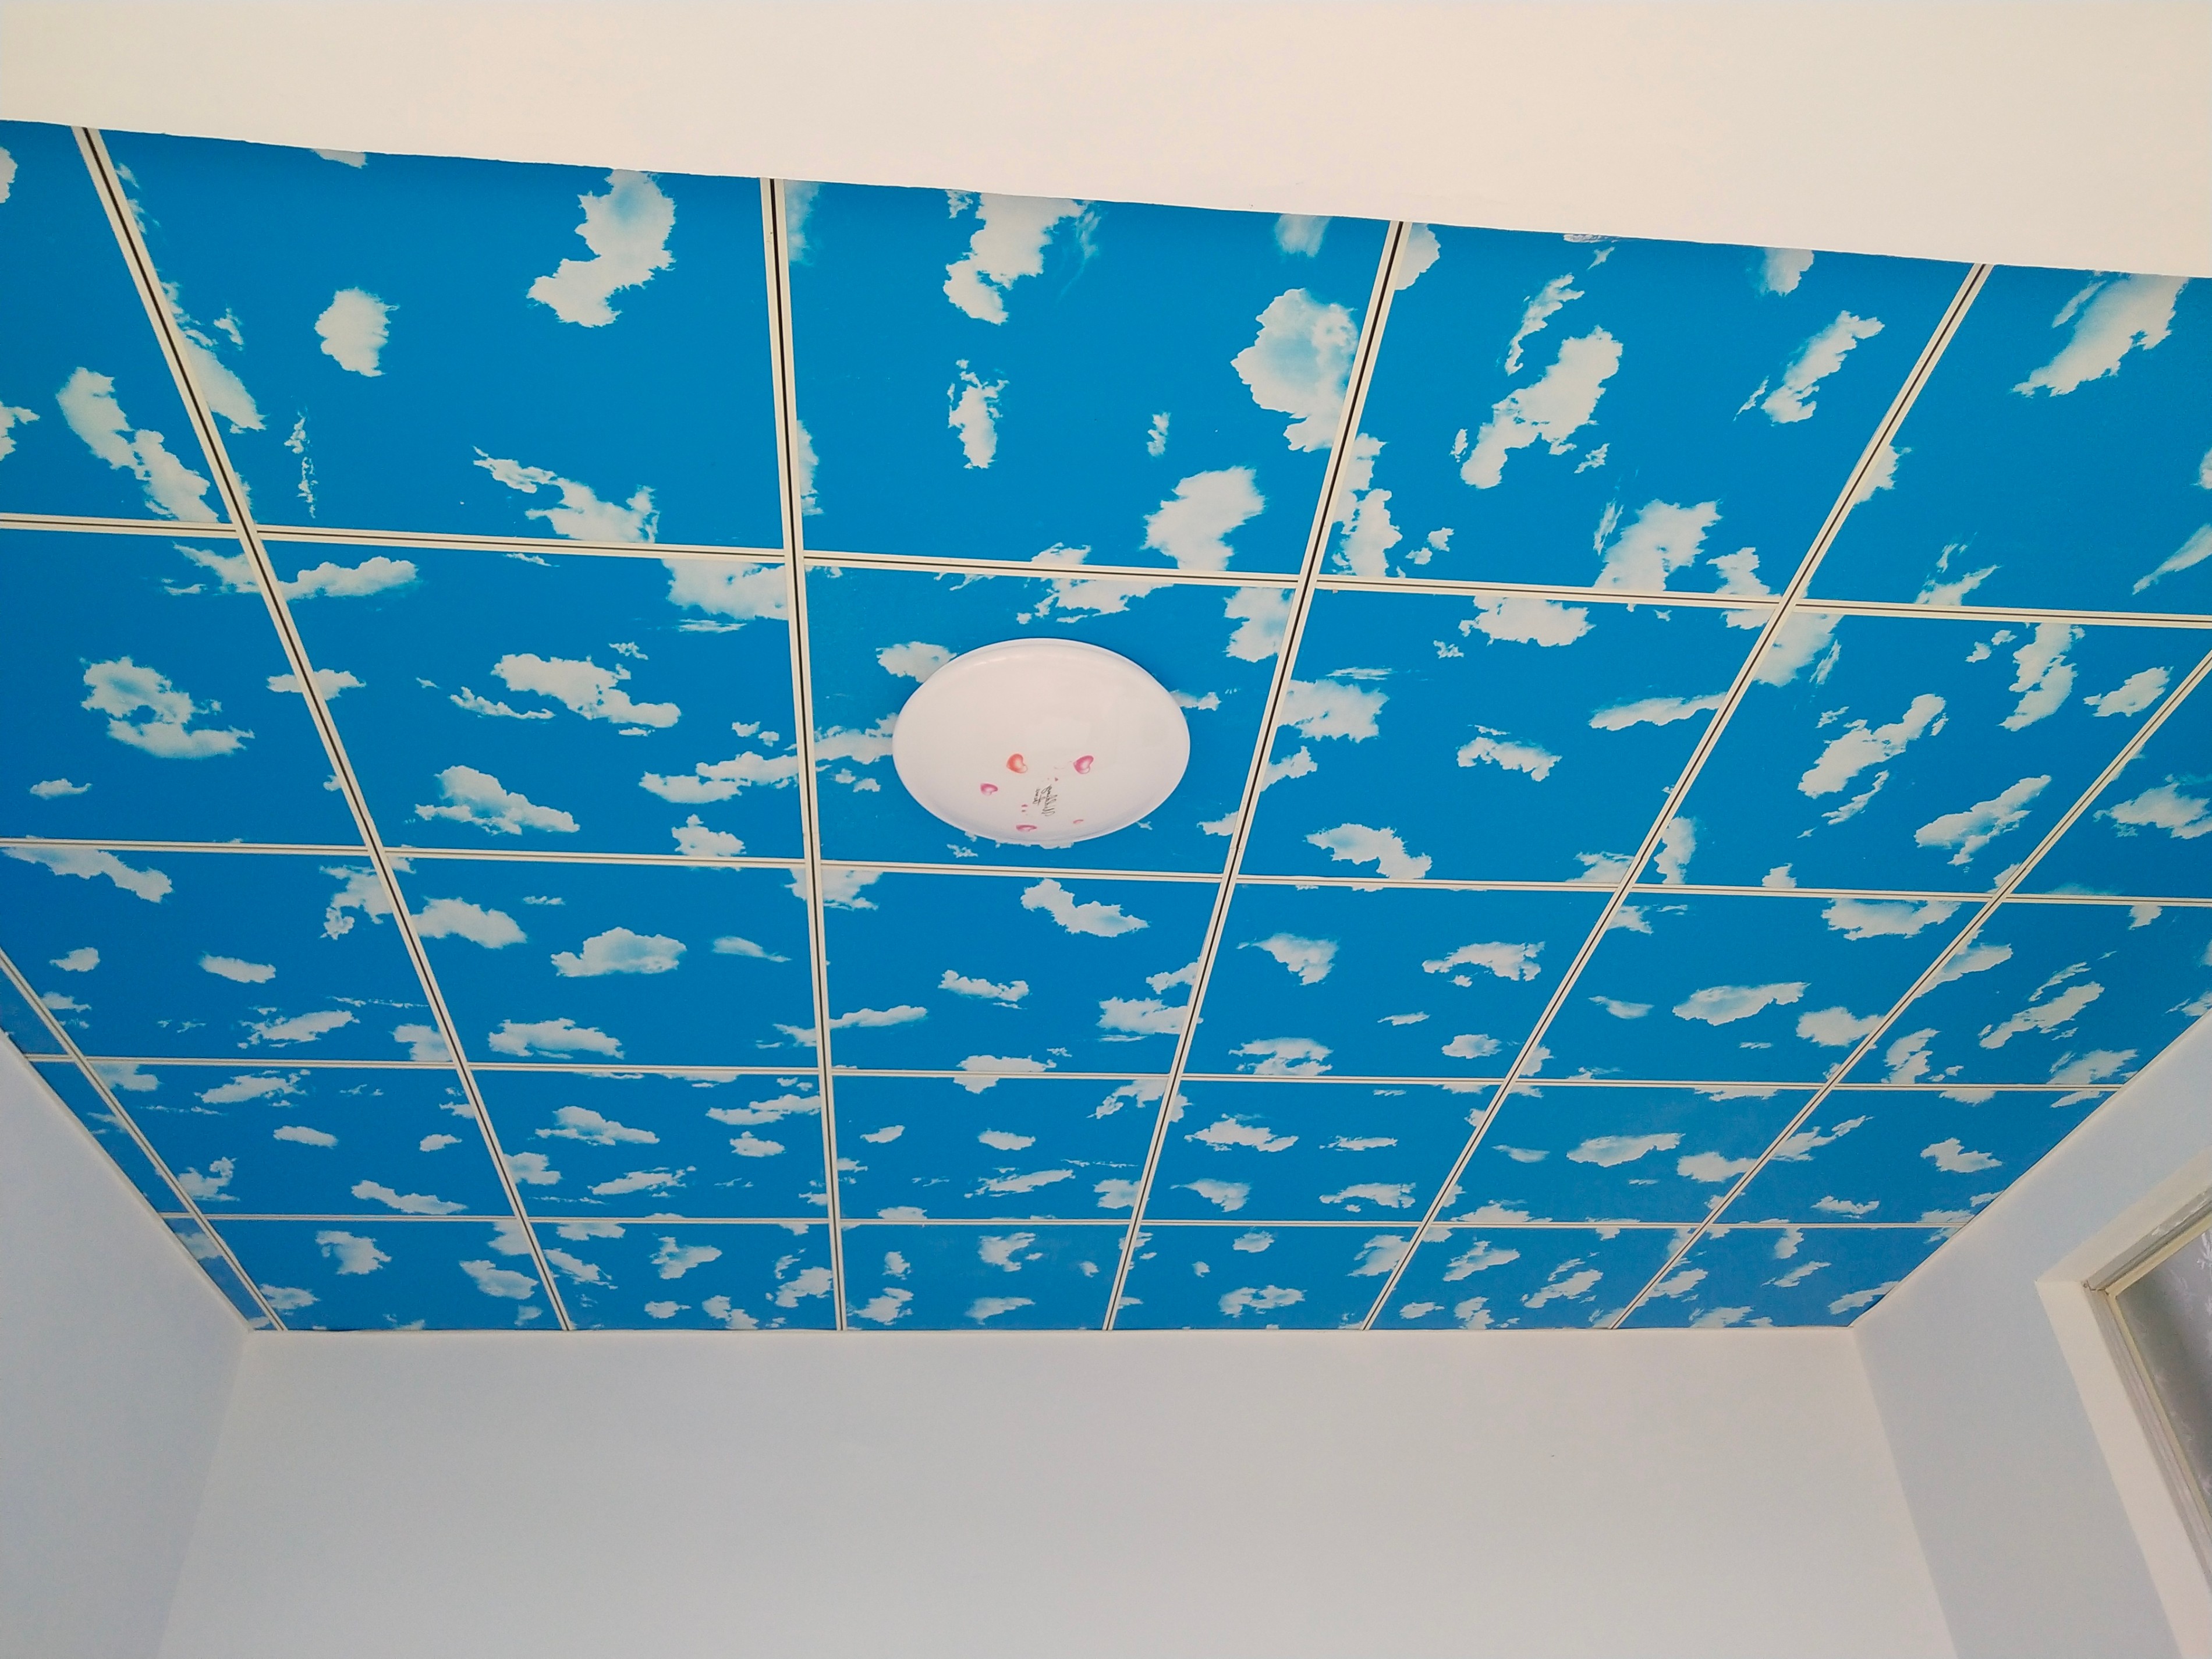 PVC Laminated Gypsum Ceiling Board in Indian Market Decorative Ceiling PVC Gypsum Ceilings